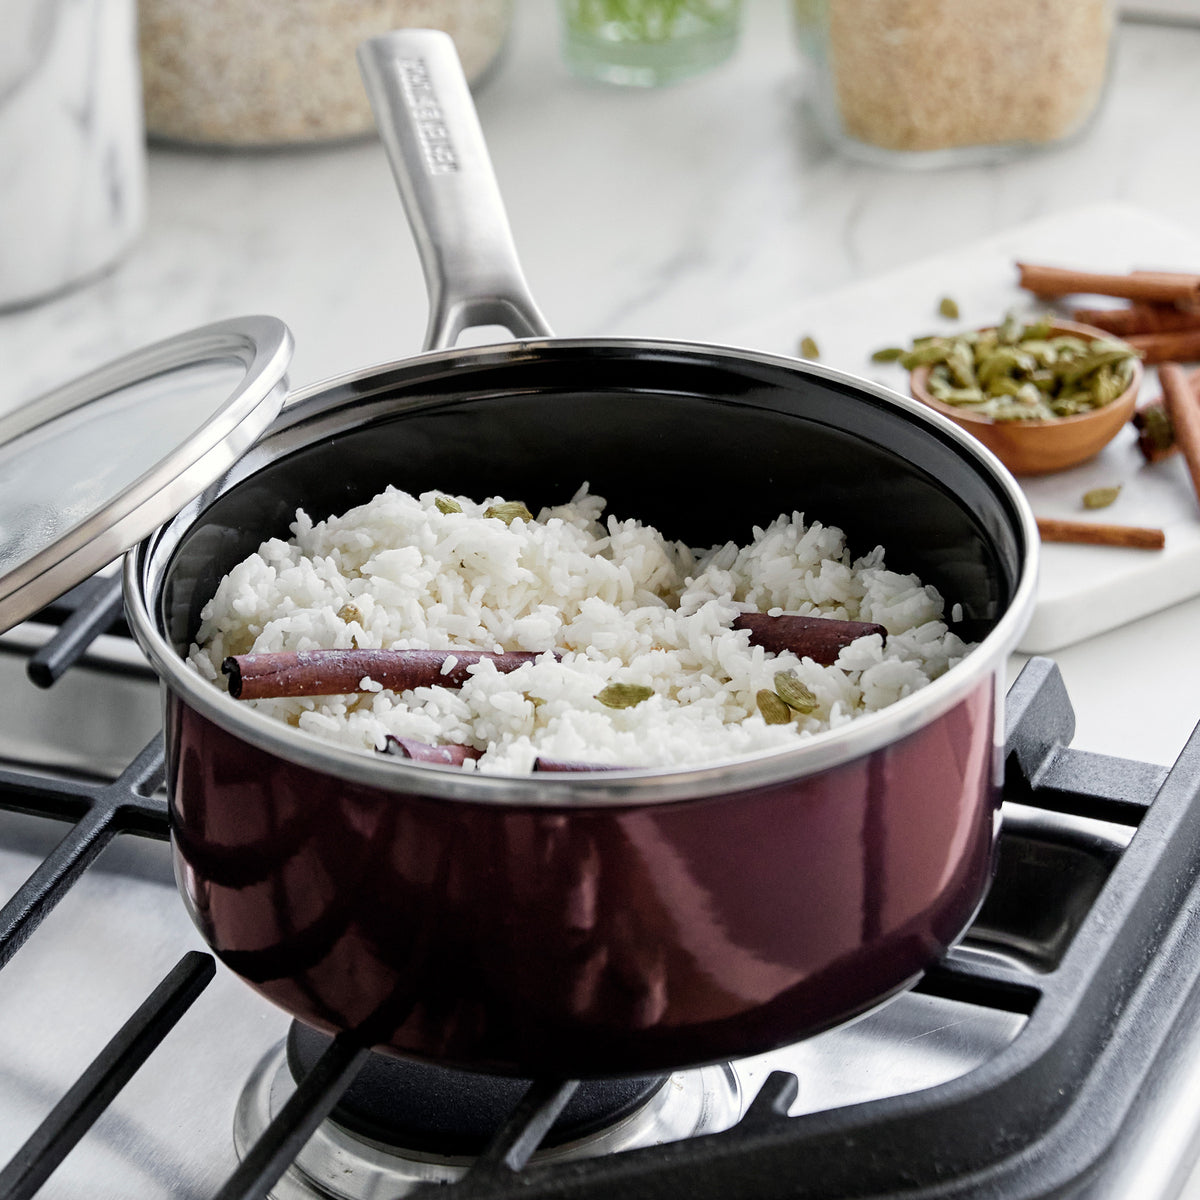 All-Clad cookware: Shop incredible discounts on the brand's